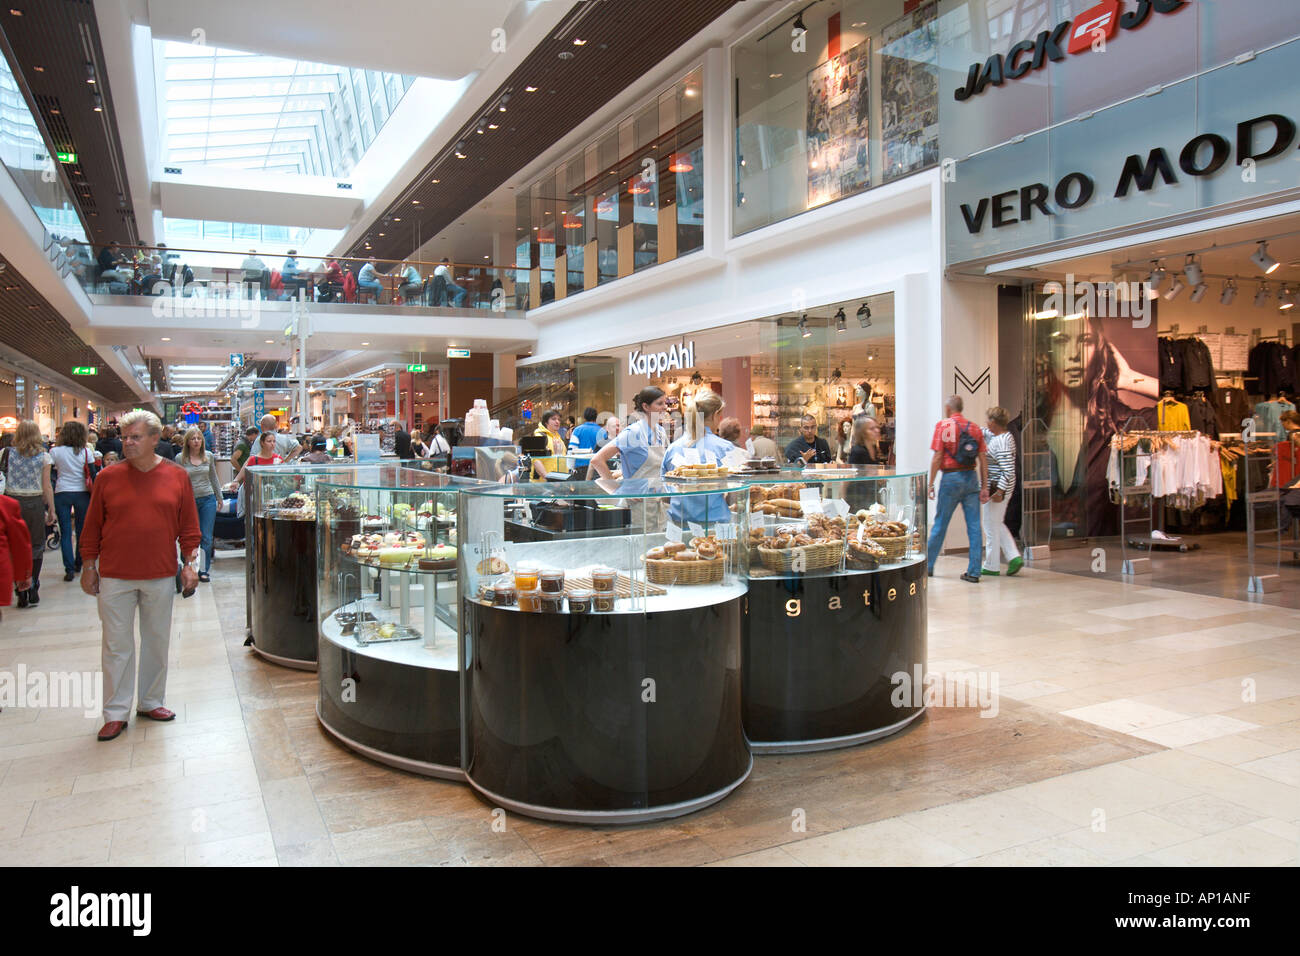 SWEDEN STOCKHOLM SHOPPING MALL GALLERIAN Stock Photo: 8938718 - Alamy